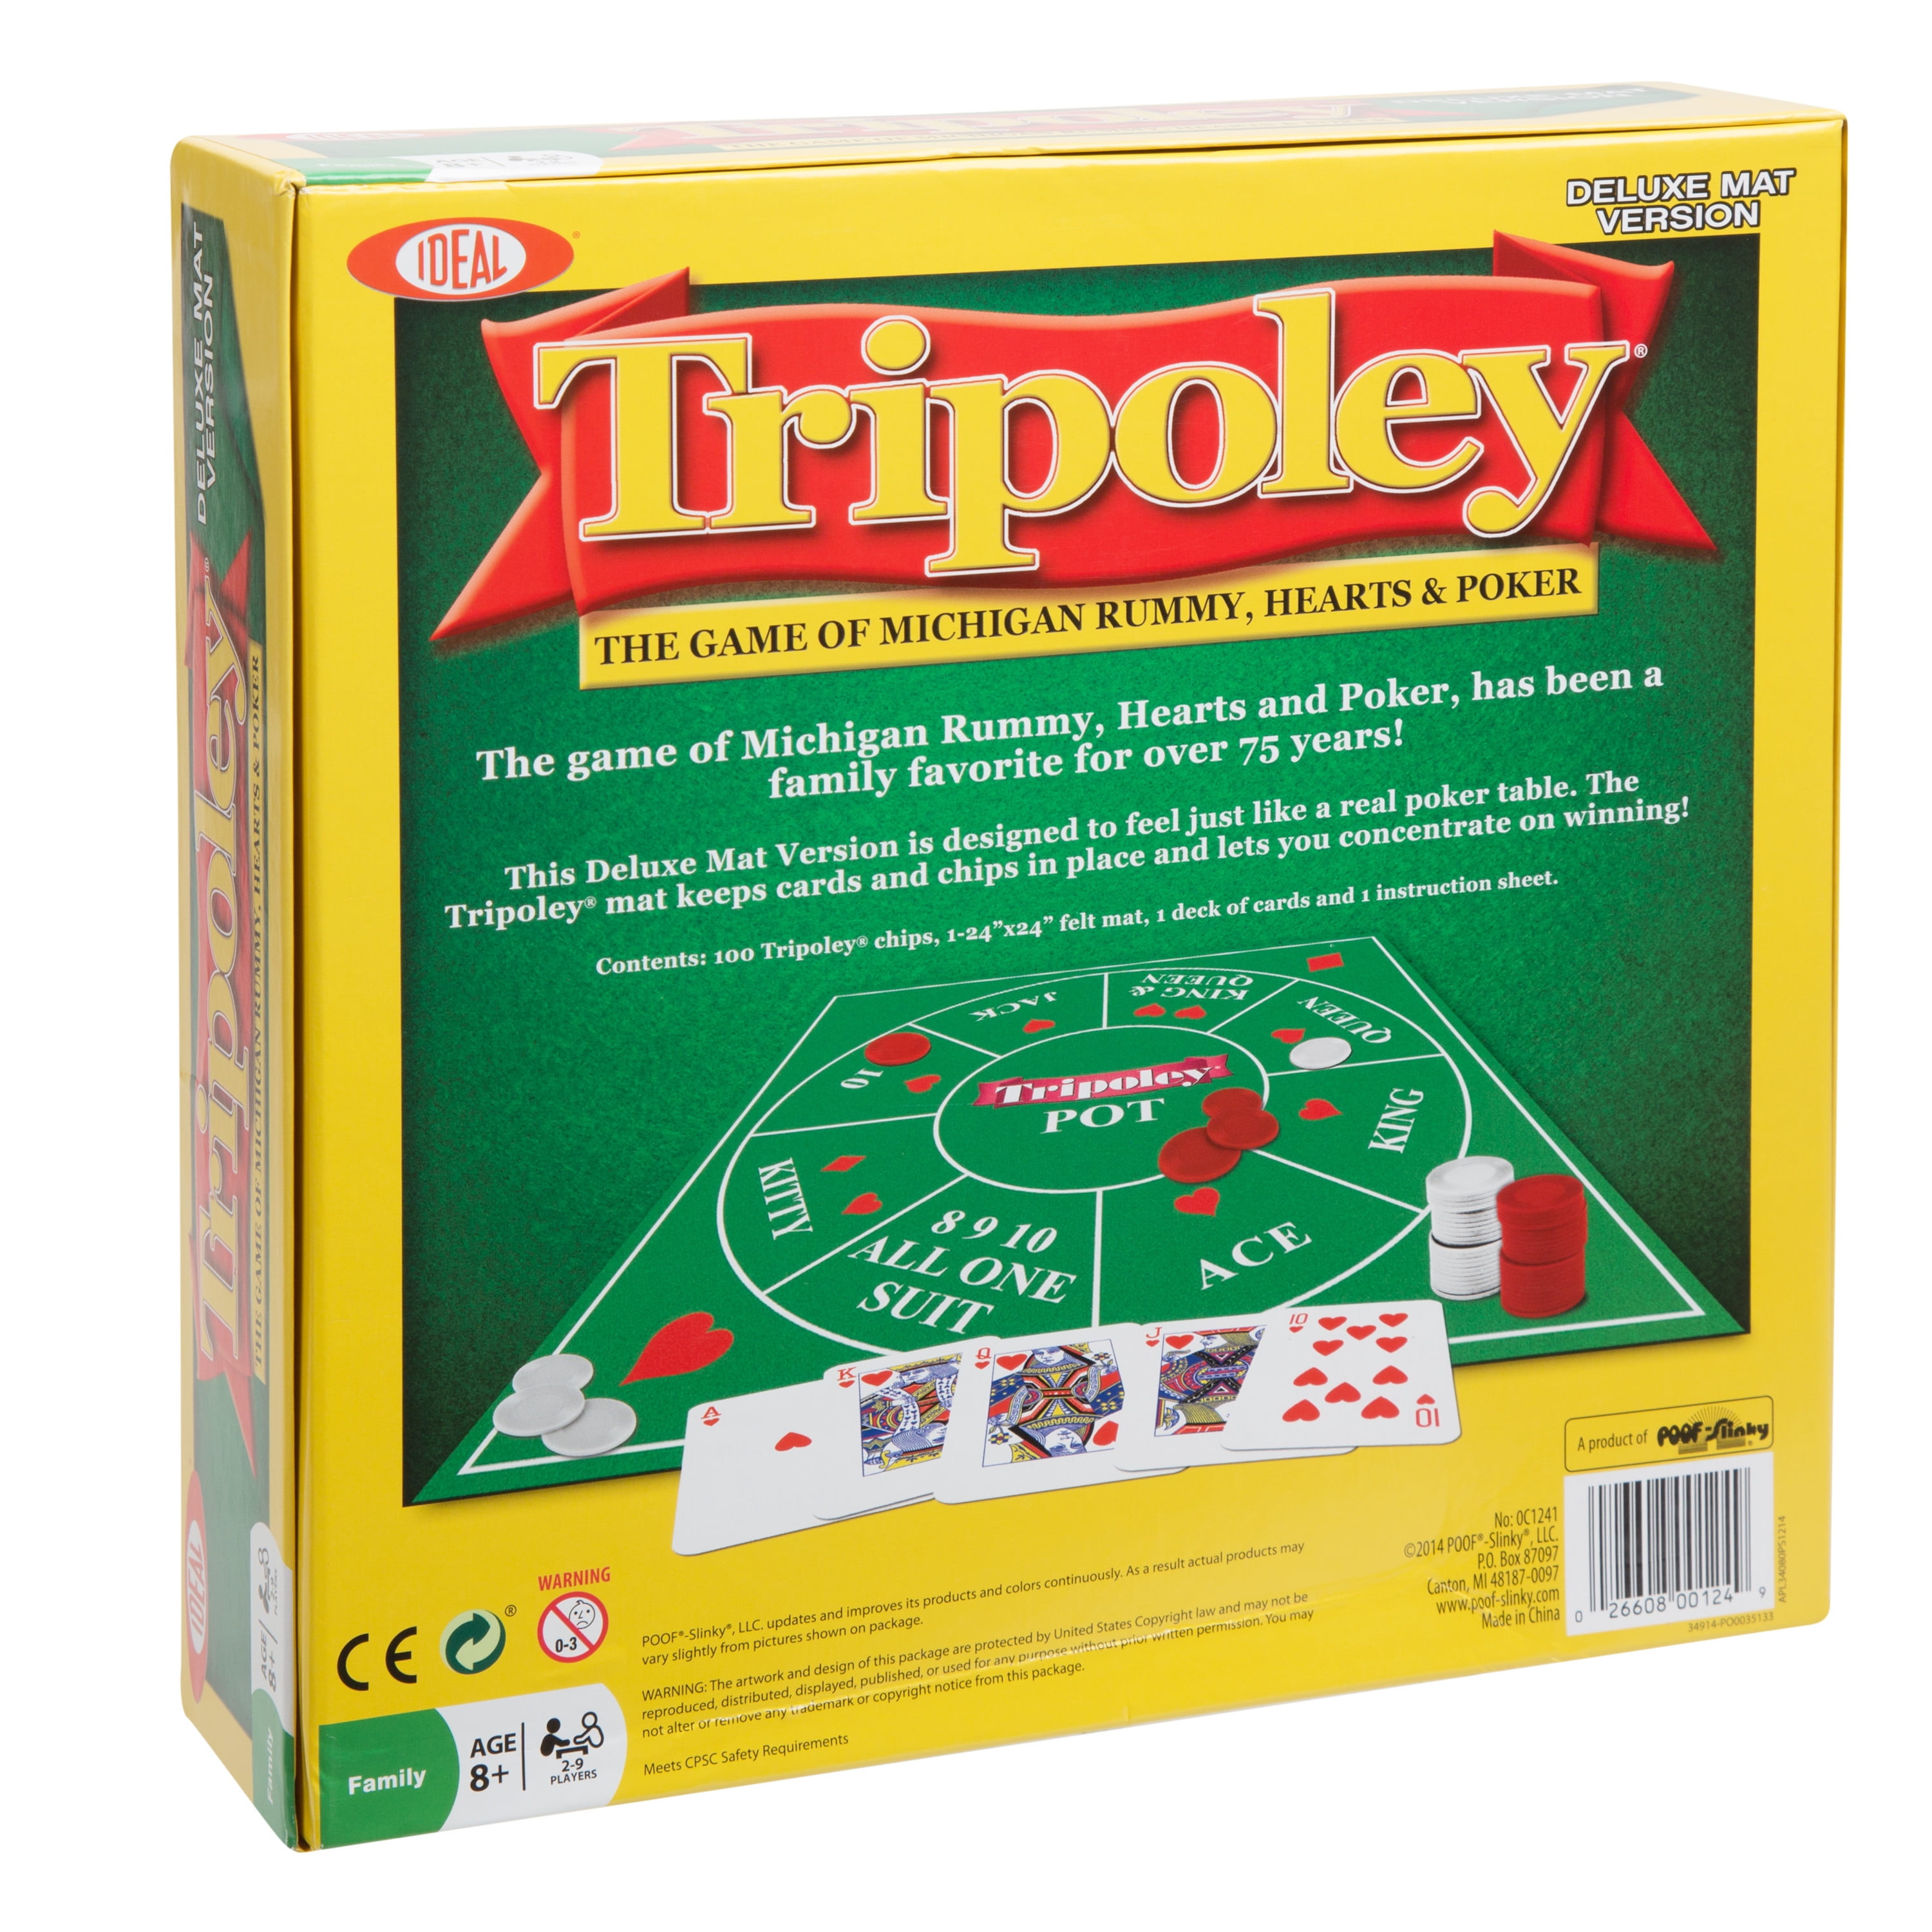 Cadaco Tripoley Deluxe Mat Version Edition Card Game 2009 for sale online 